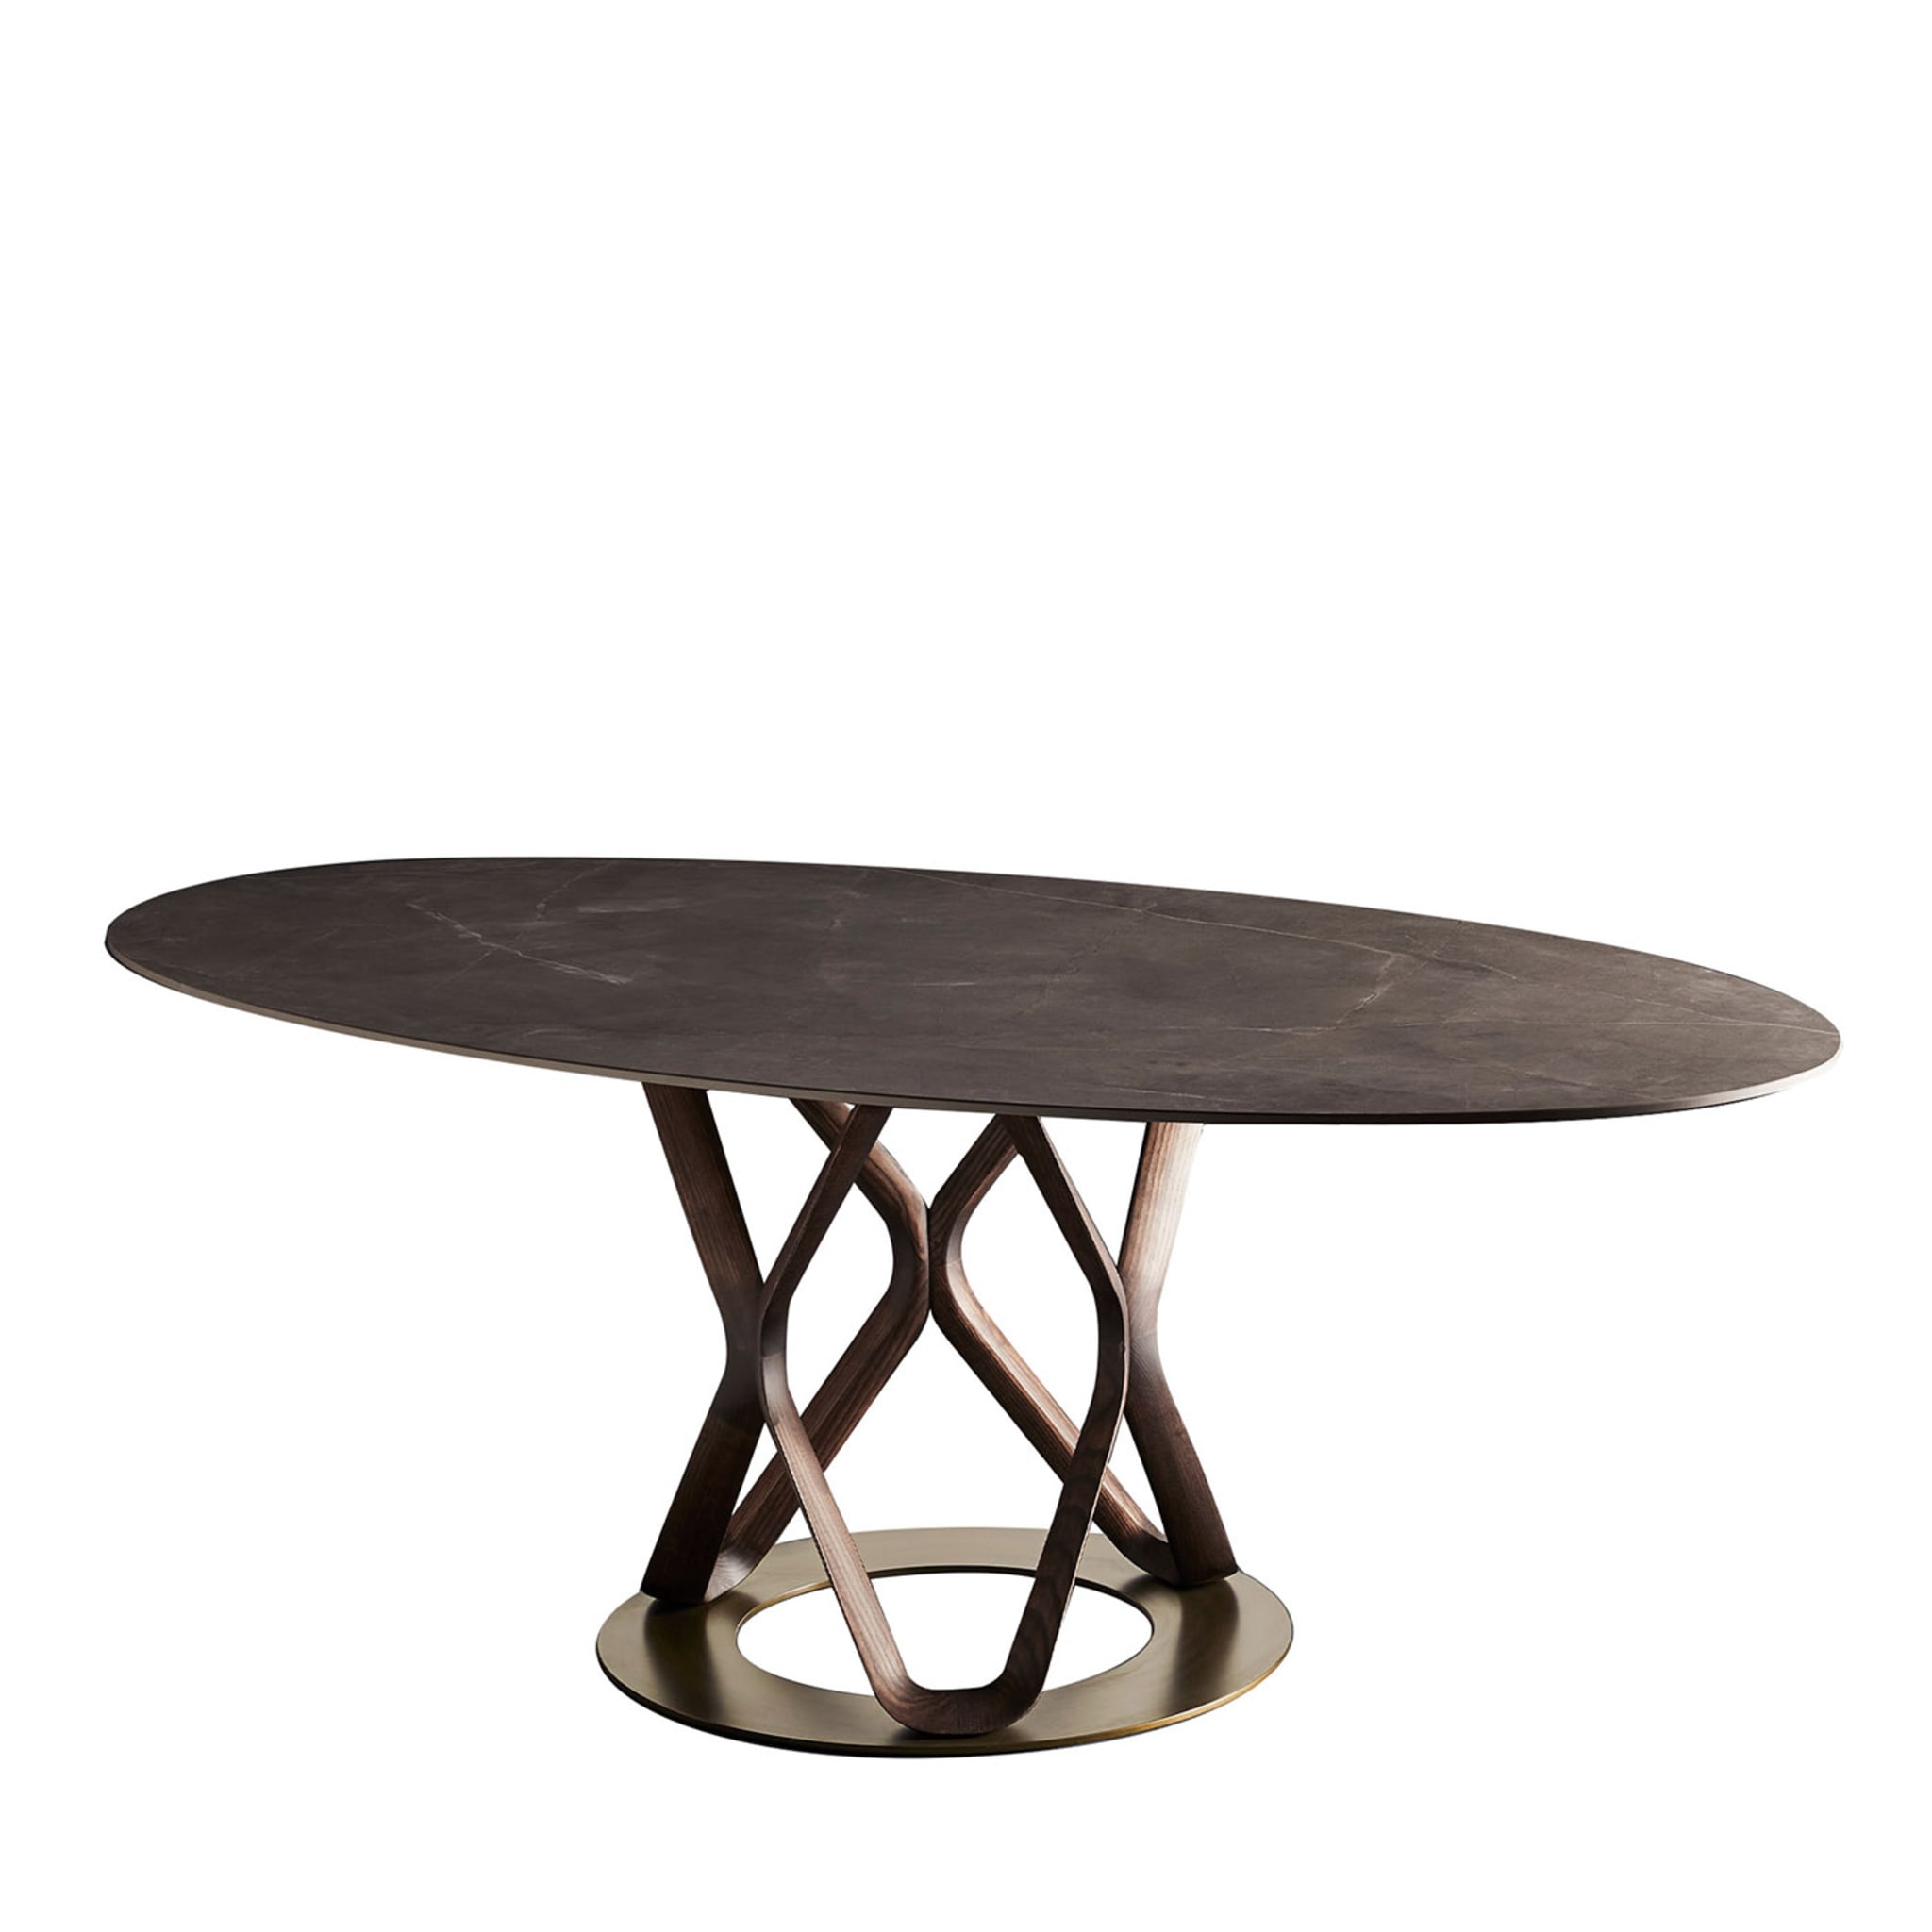 V6 Oval Brown Table by F. Di Martino - Main view